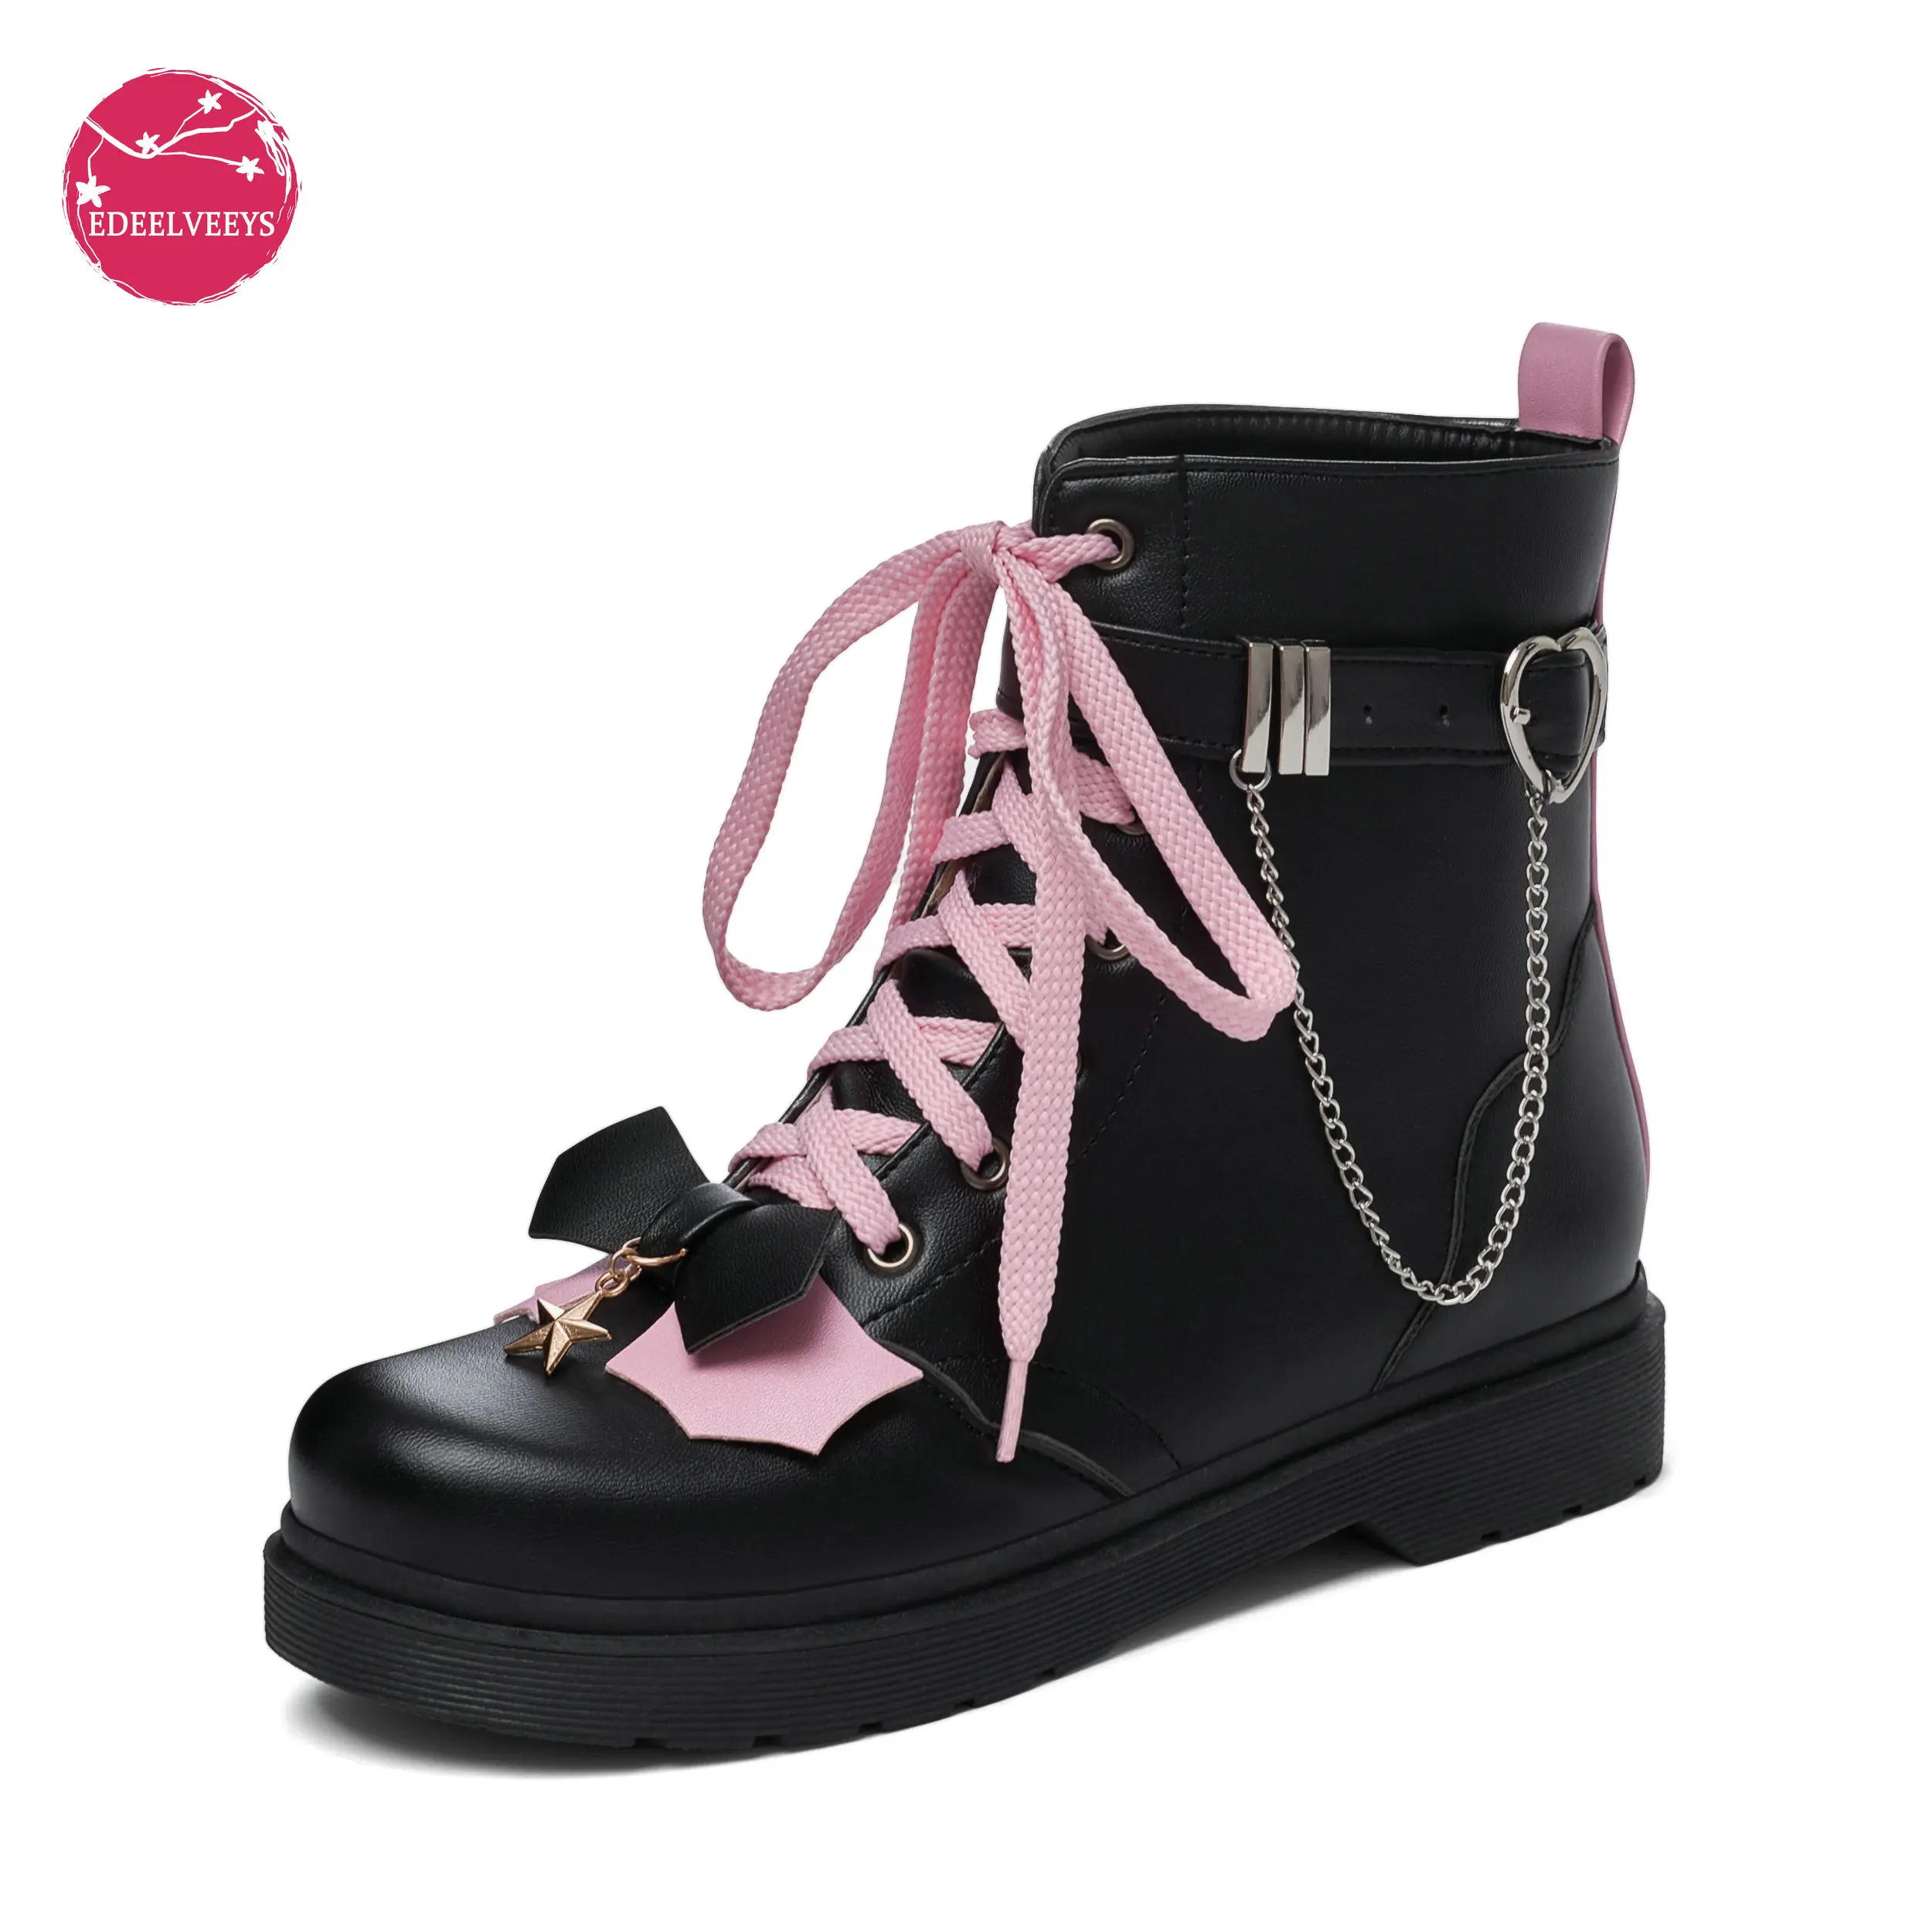 

Martin Boots Plus Size Women Lolita Thick-Soled Lace Up Shoes Gothic Bat Wings Darkness Black Motorcycle Booties Metal Chain